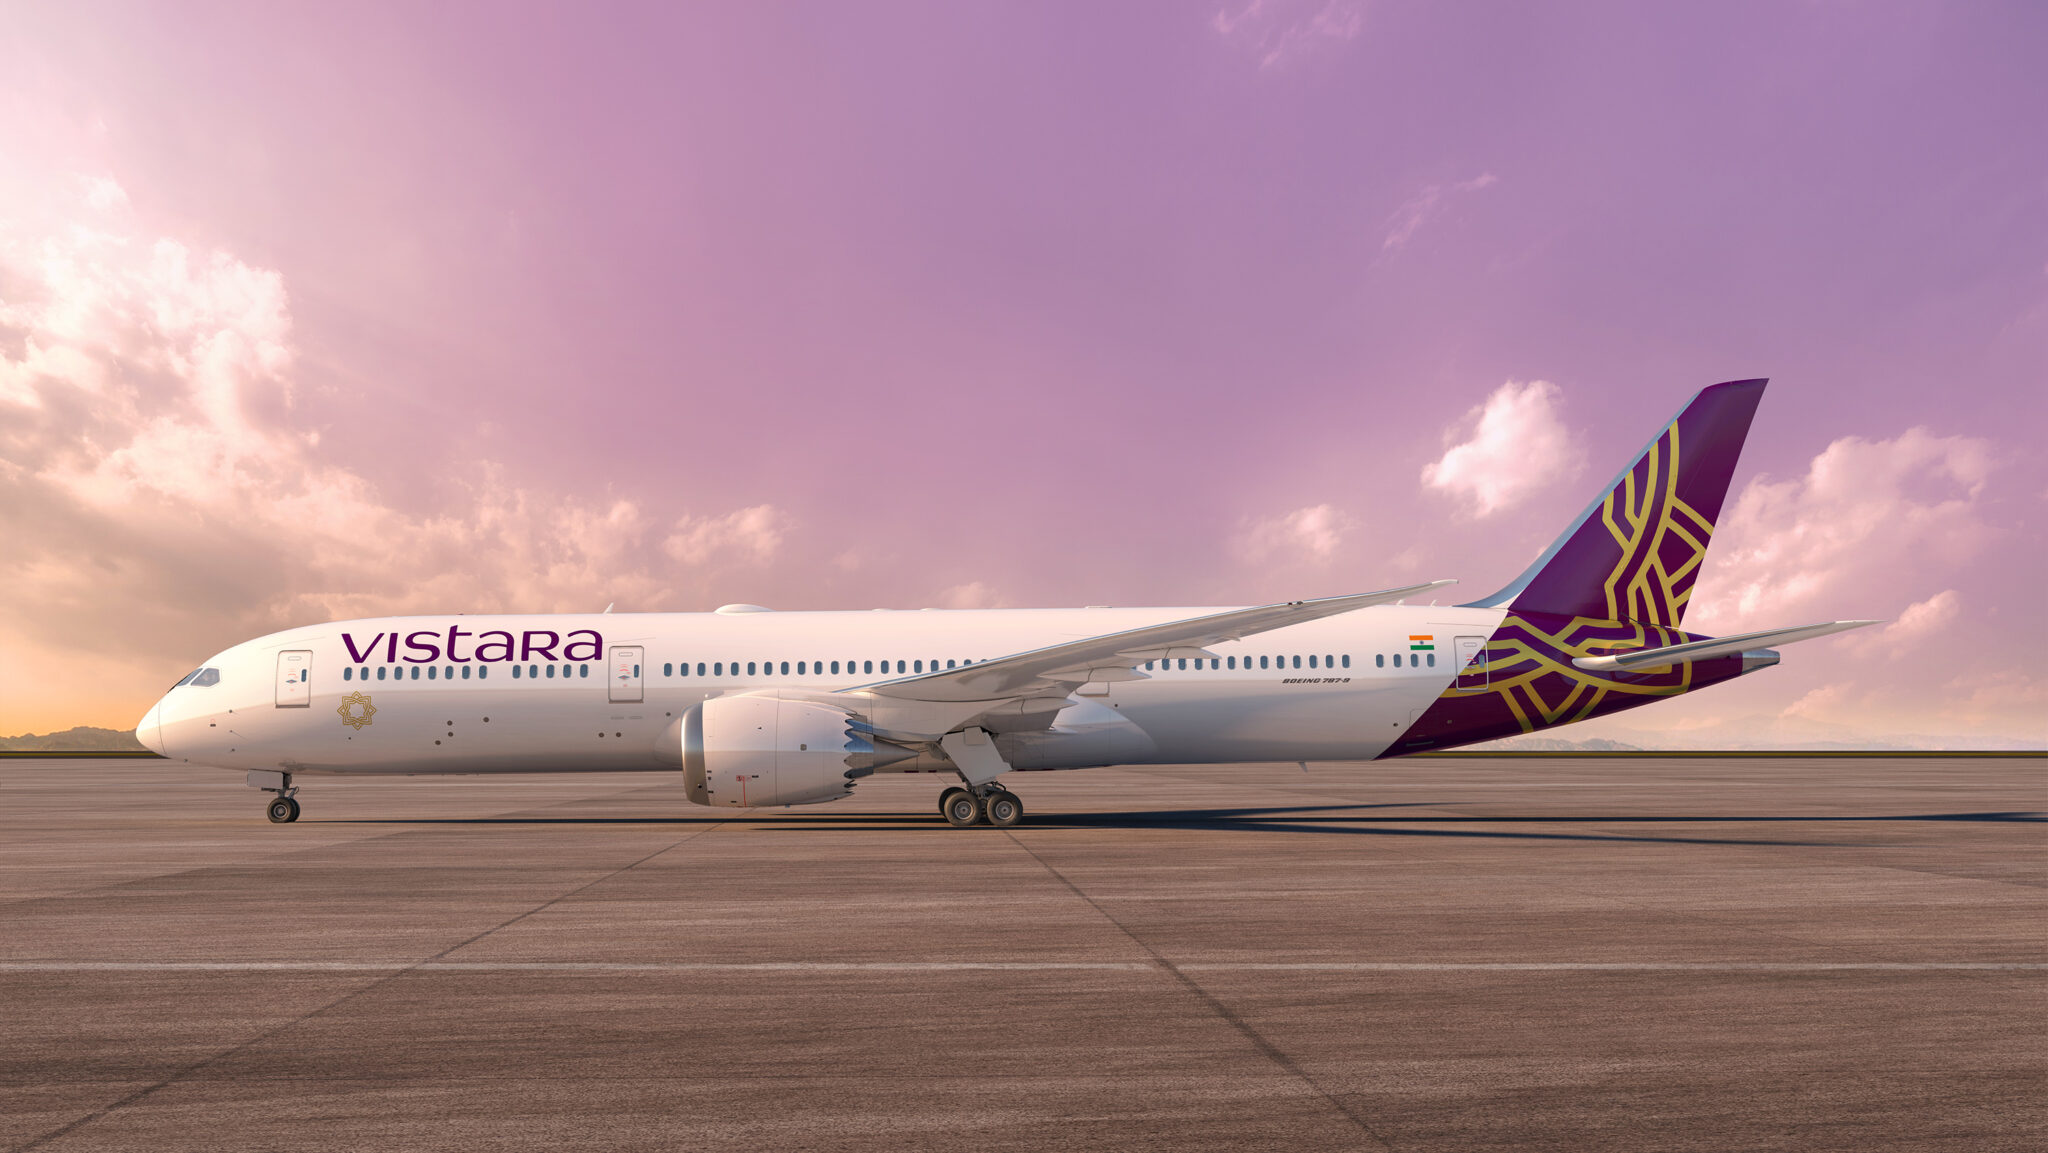 vistara upgrades the experience on delhi bali route with its state of the art boeing 787 9 dreamline